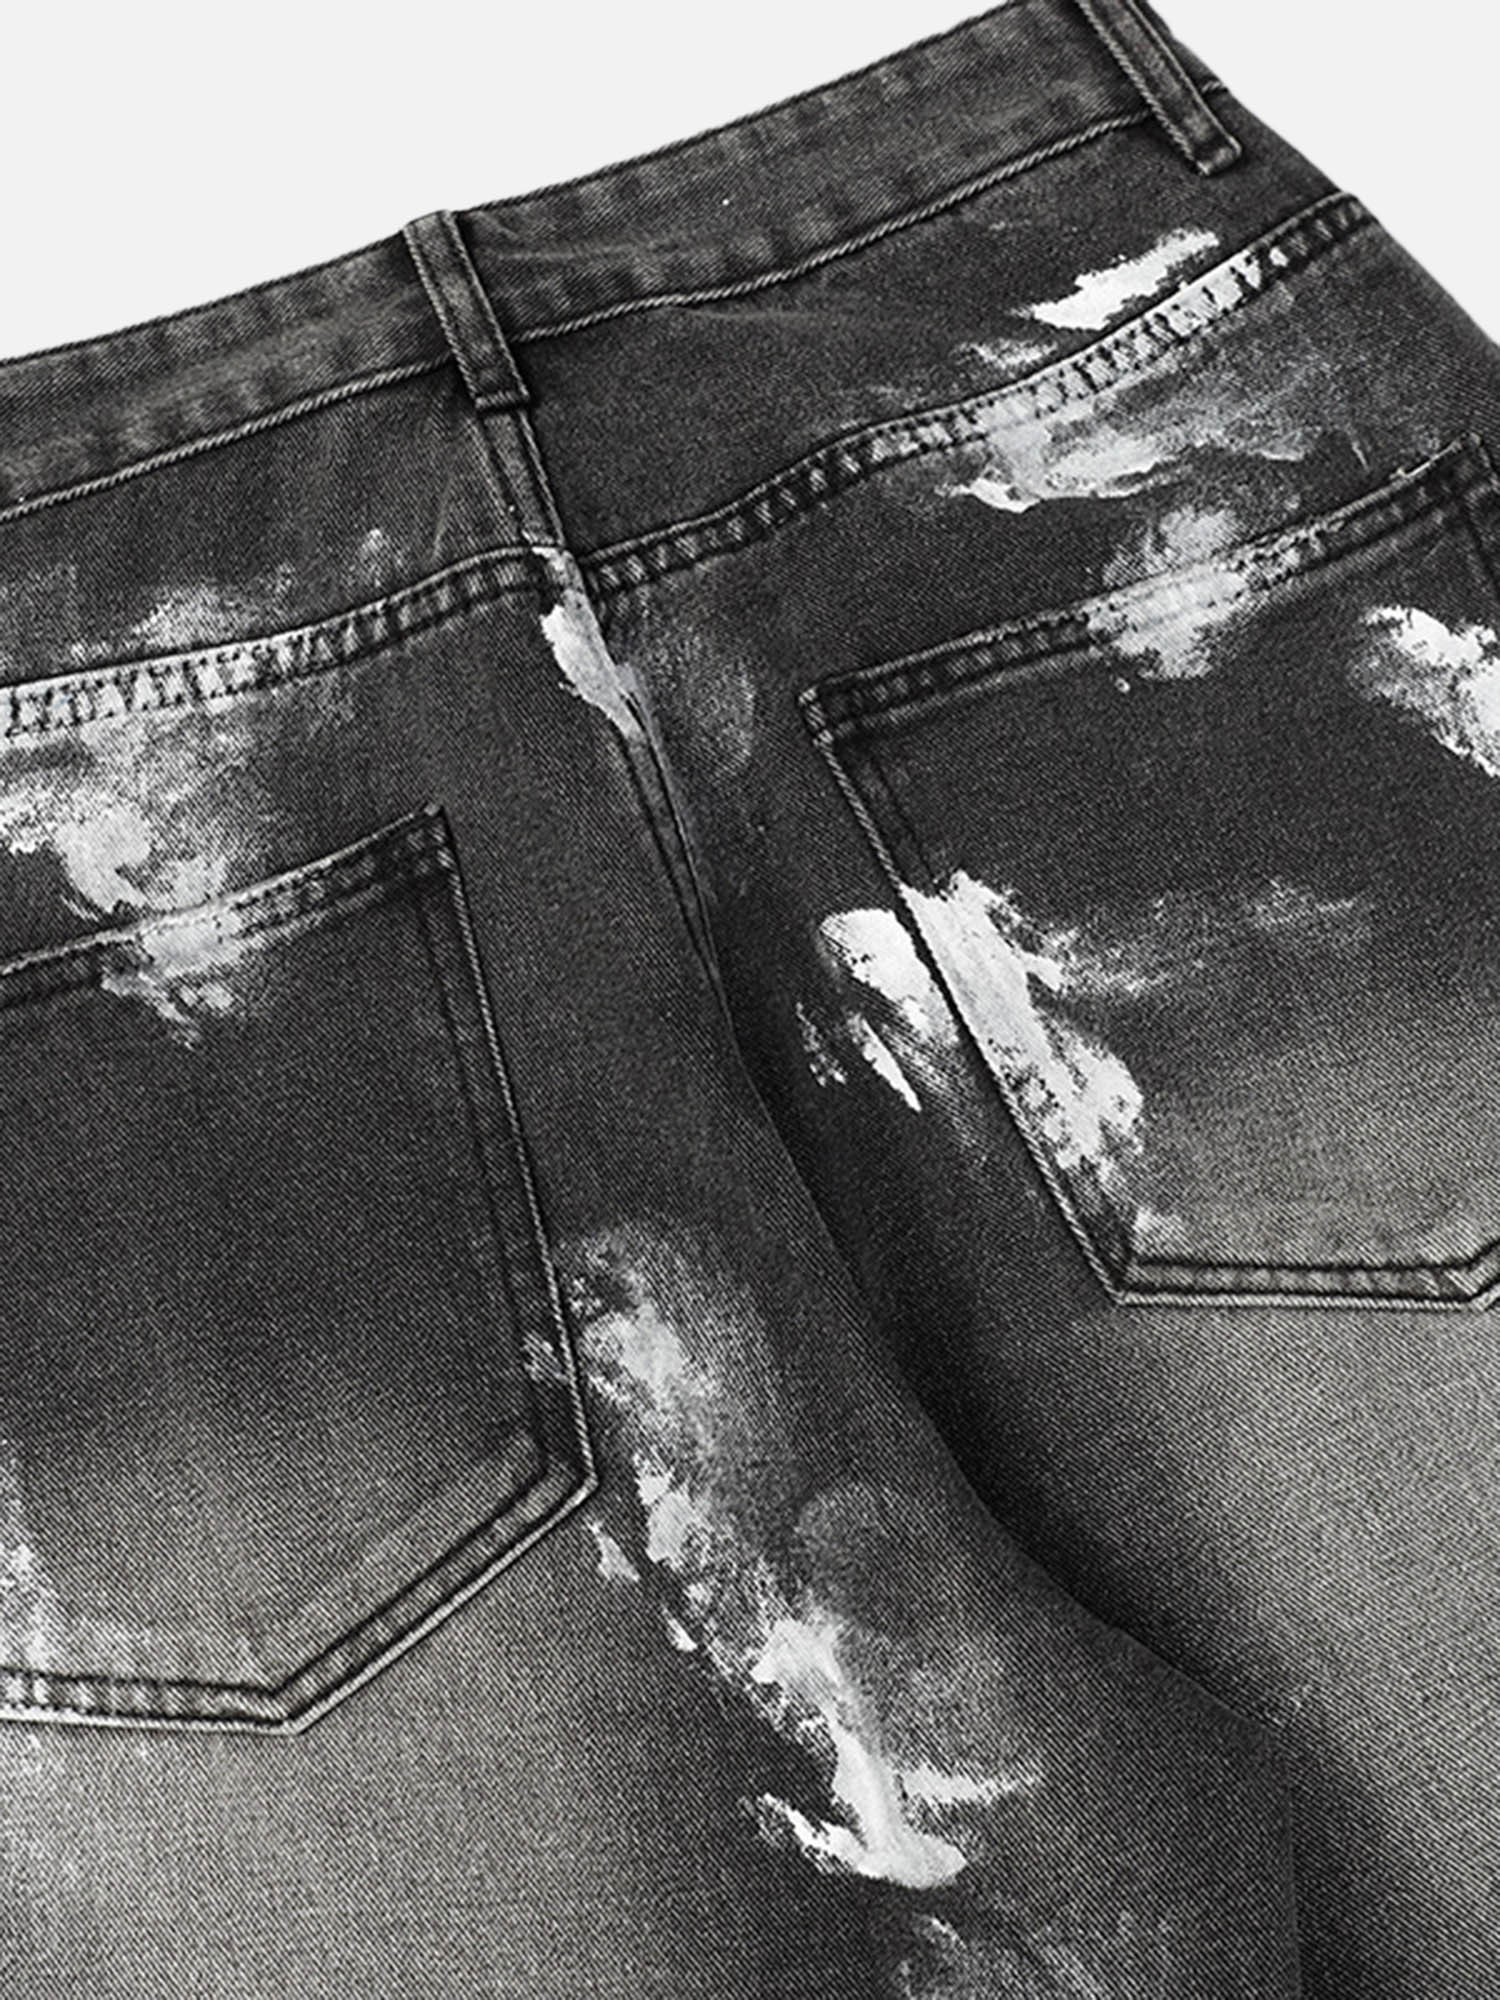 American Street Fashion Heavy Industry Washed Distressed Jeans